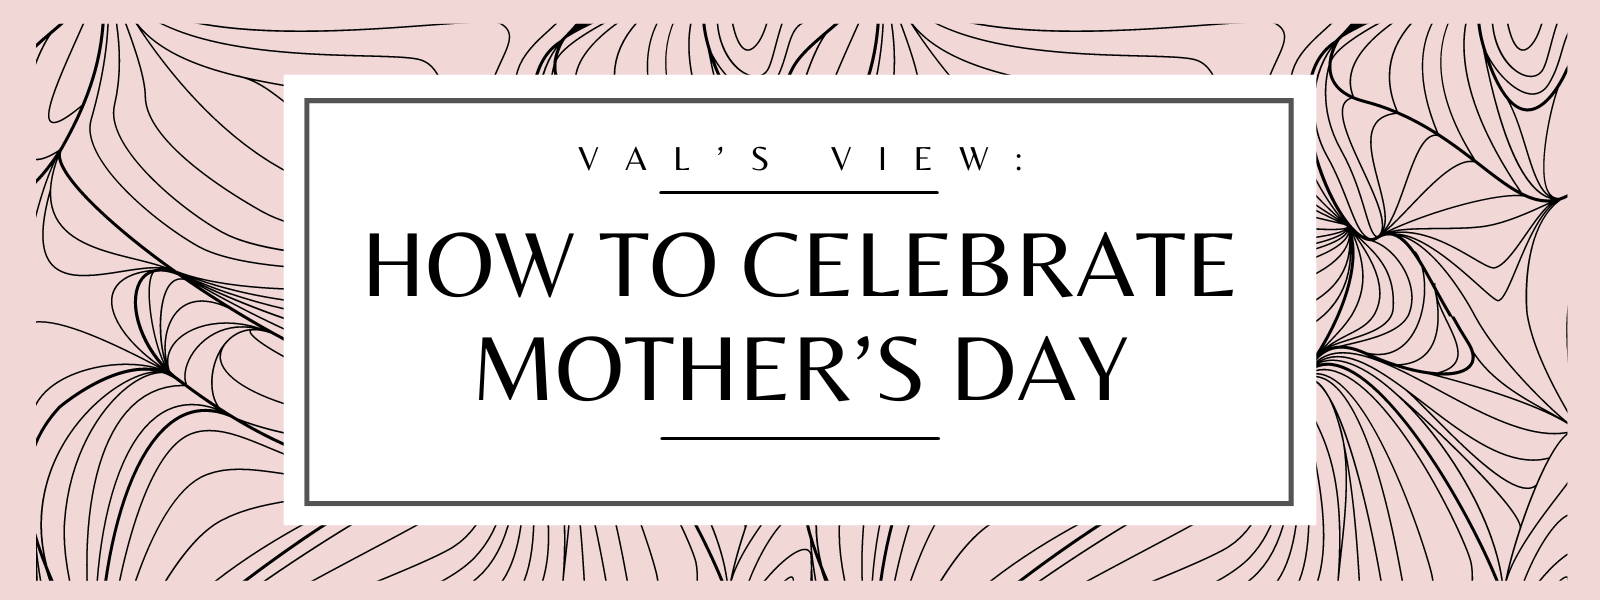 Val's View: How to Celebrate Mother's Day